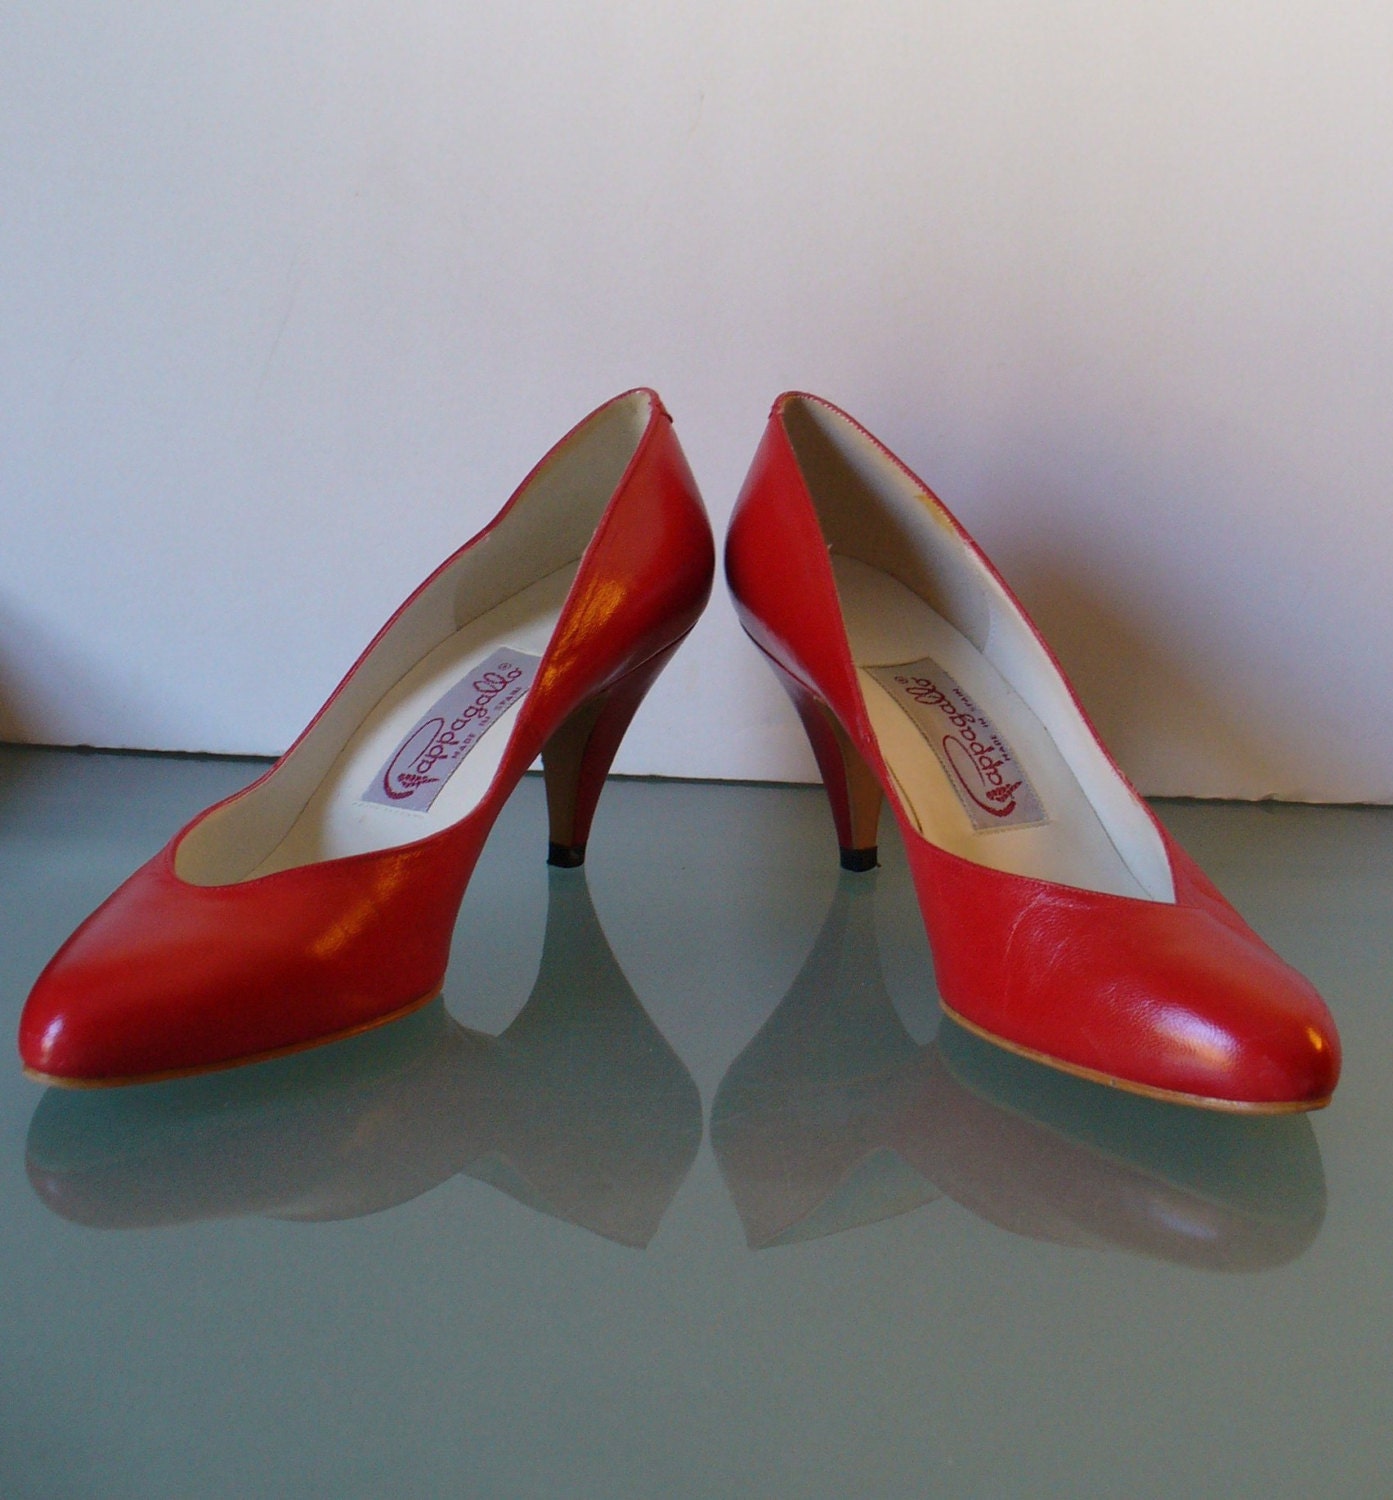 Vintage Pappagallo Red Leather Pumps Made in Spain Size 6.5 M